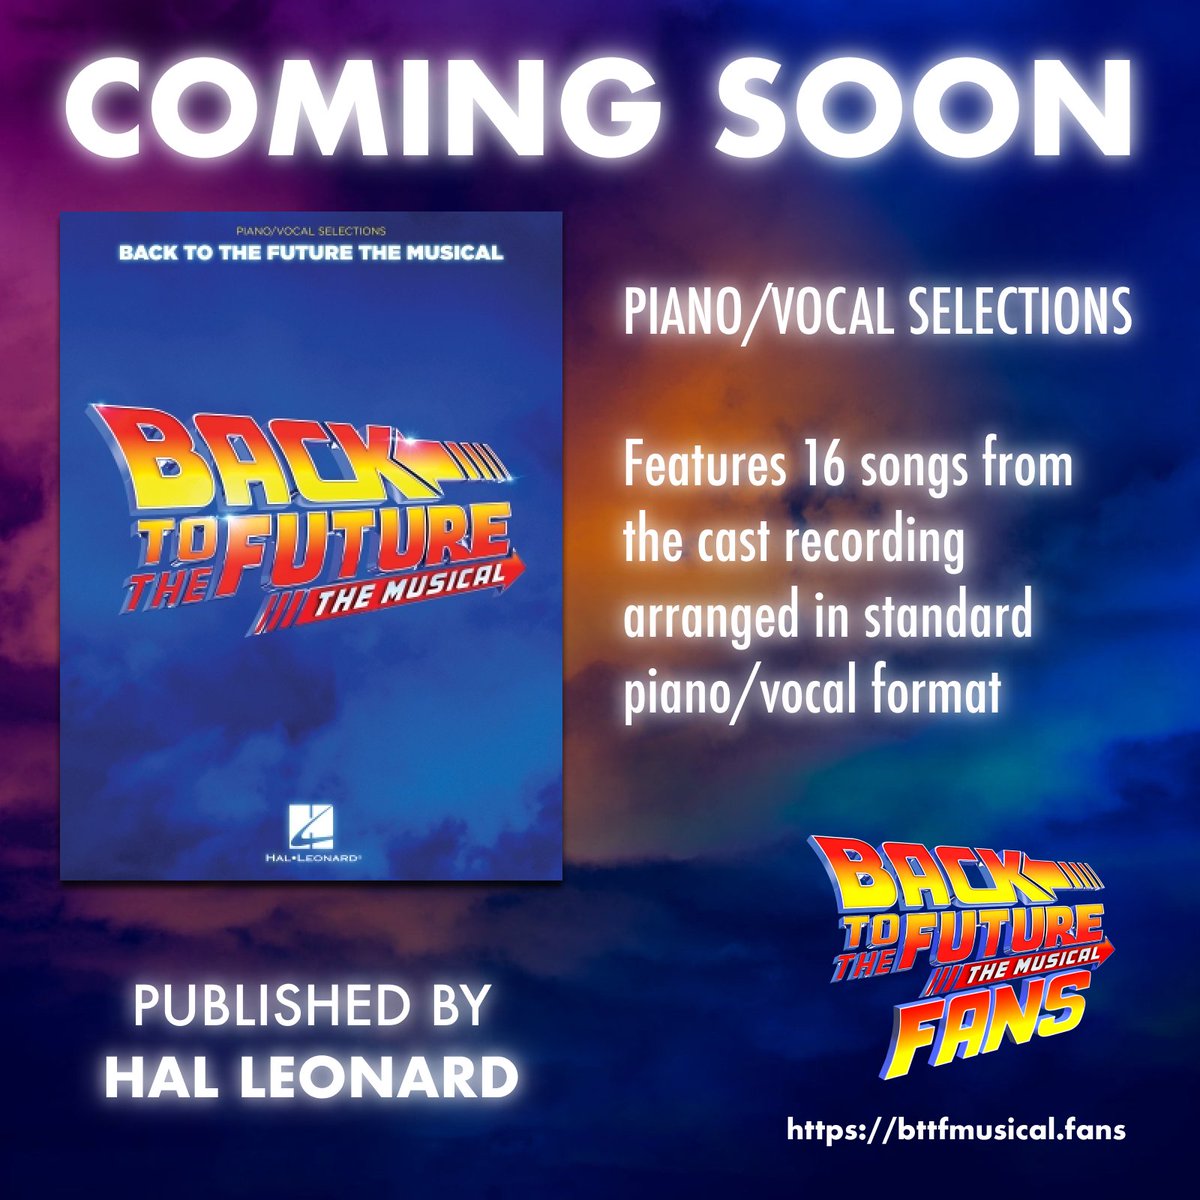 The @BTTFmusical Piano/Vocal Selections #songbook from @HalLeonardCorp is almost here…

European release: TBC
US release: May 31, 2023

#bttfmusical #backtothefuturemusical #bttfbway #bttfbroadway #backtothefuturebroadway #bttf #backtothefuture #pianovocalselection #sheetmusic